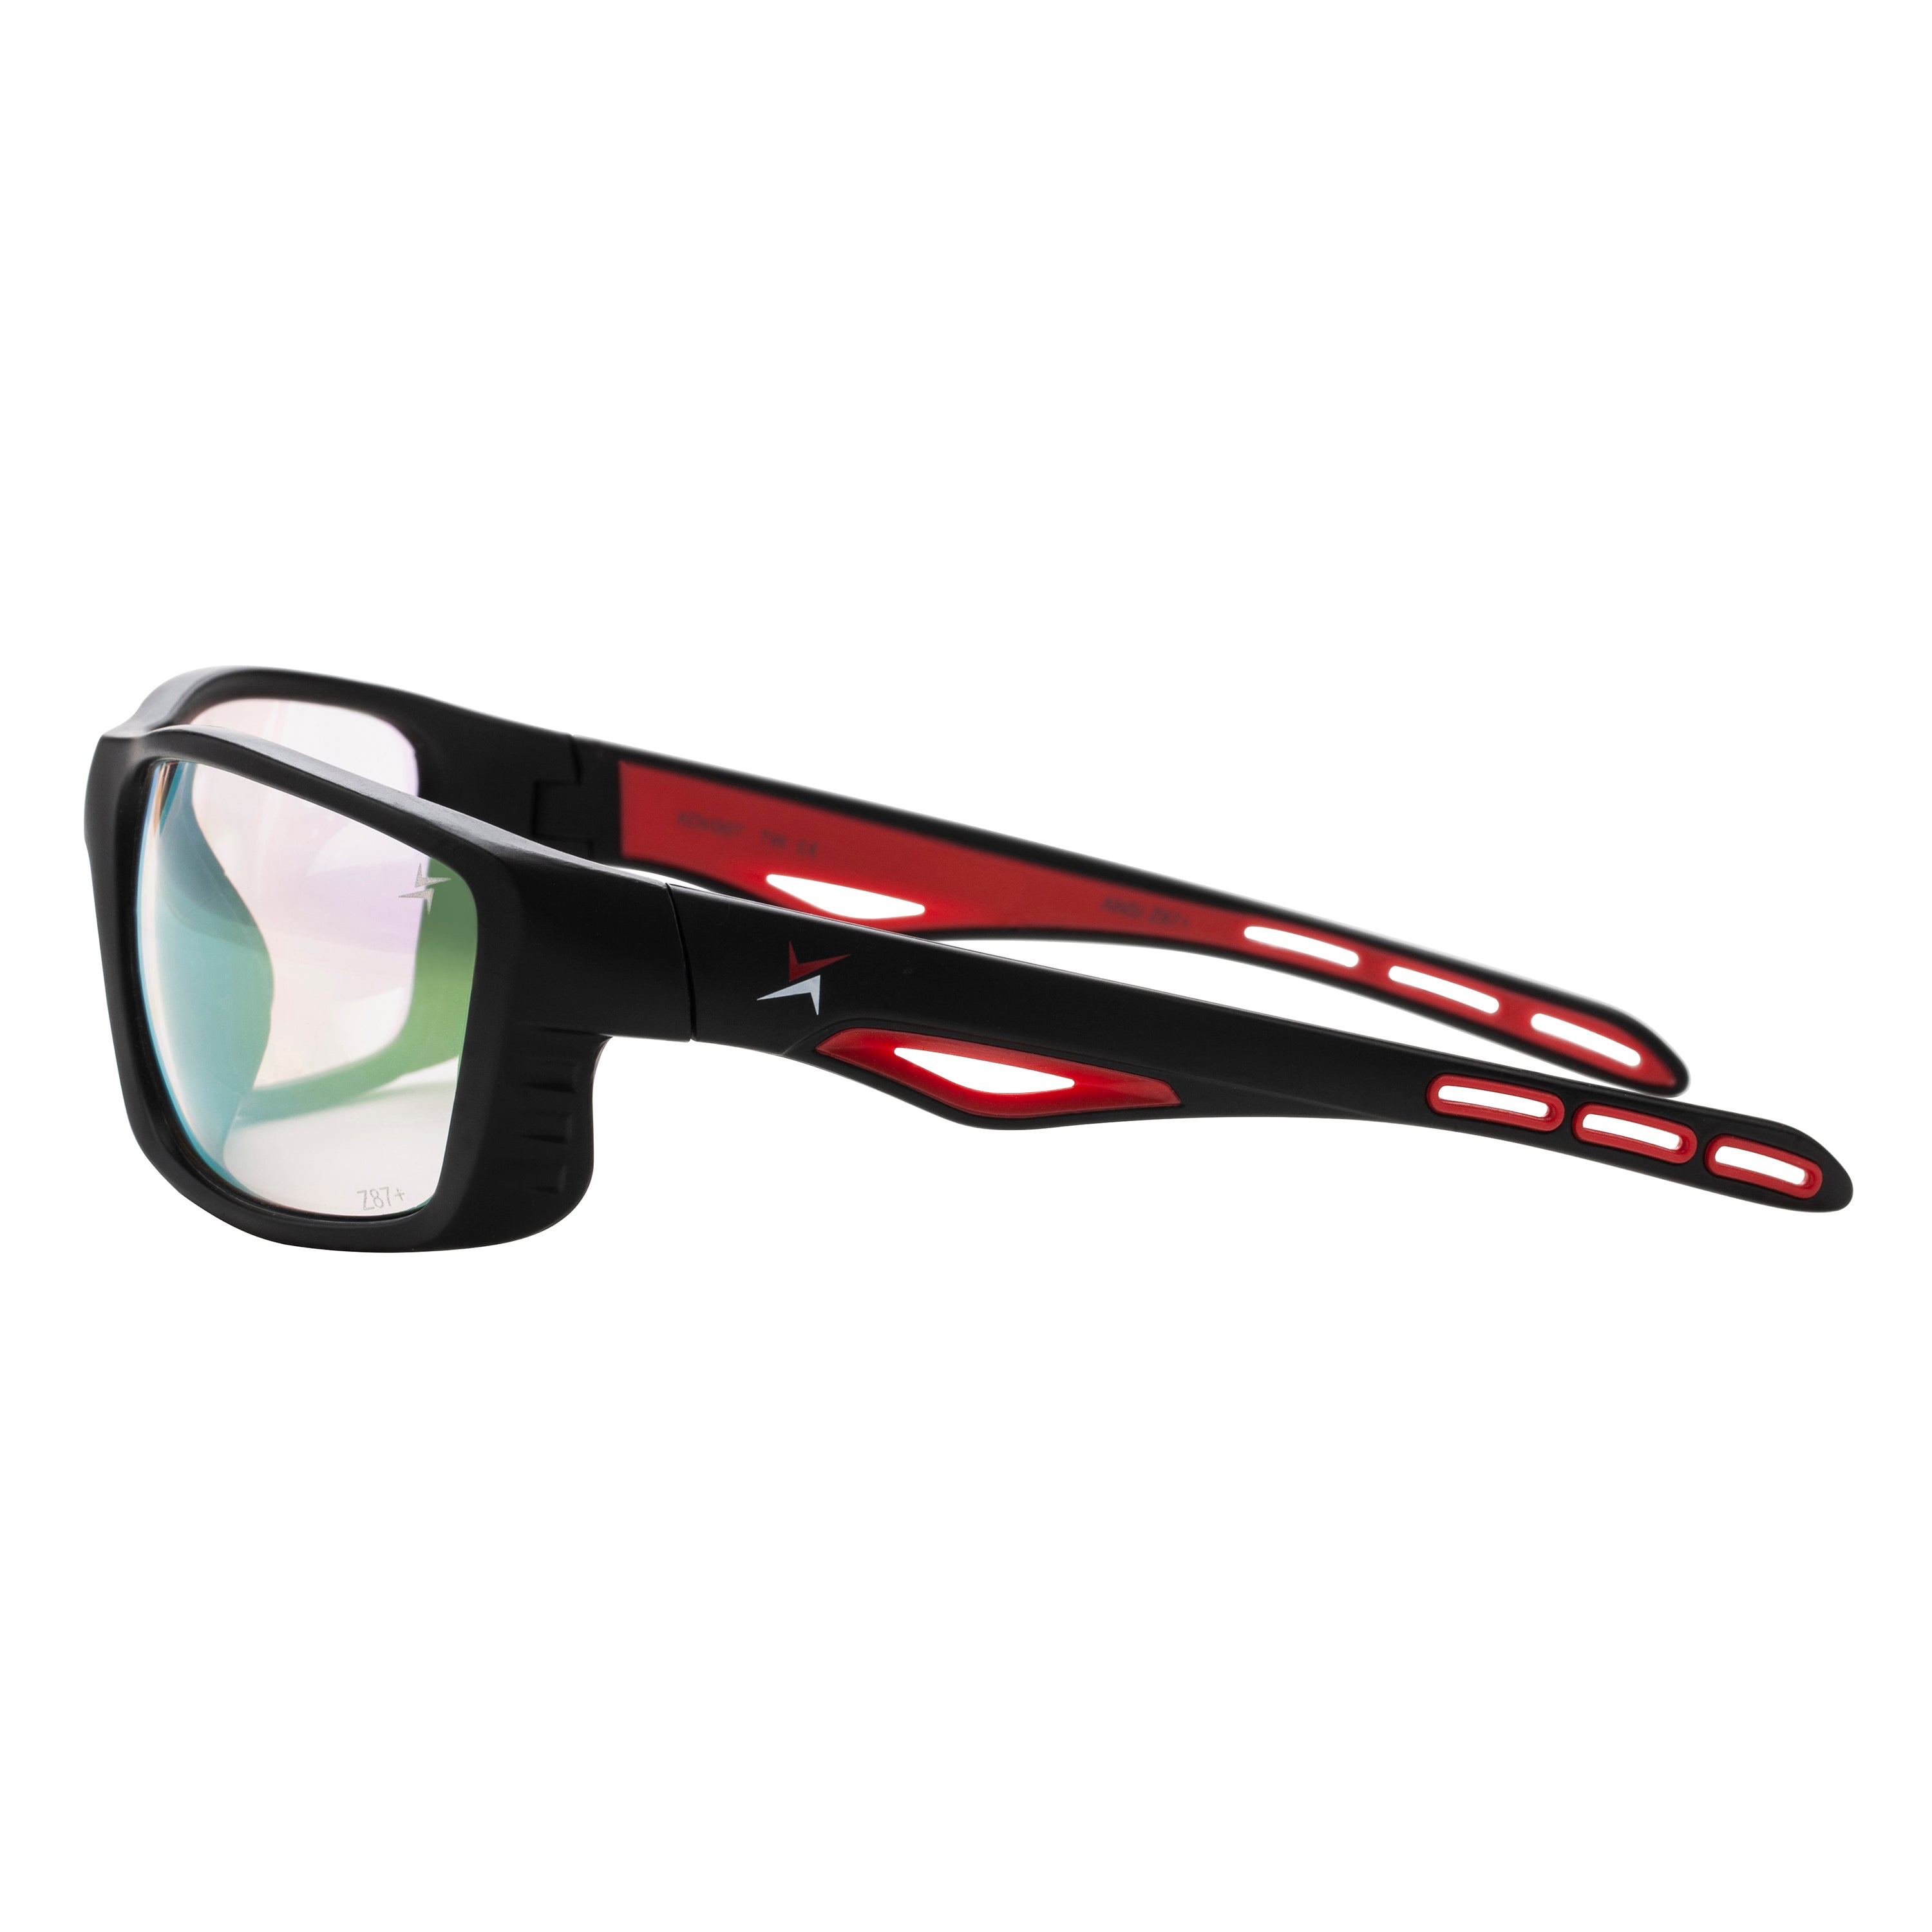 Photochromic 007-2 Clear to Brown Lens